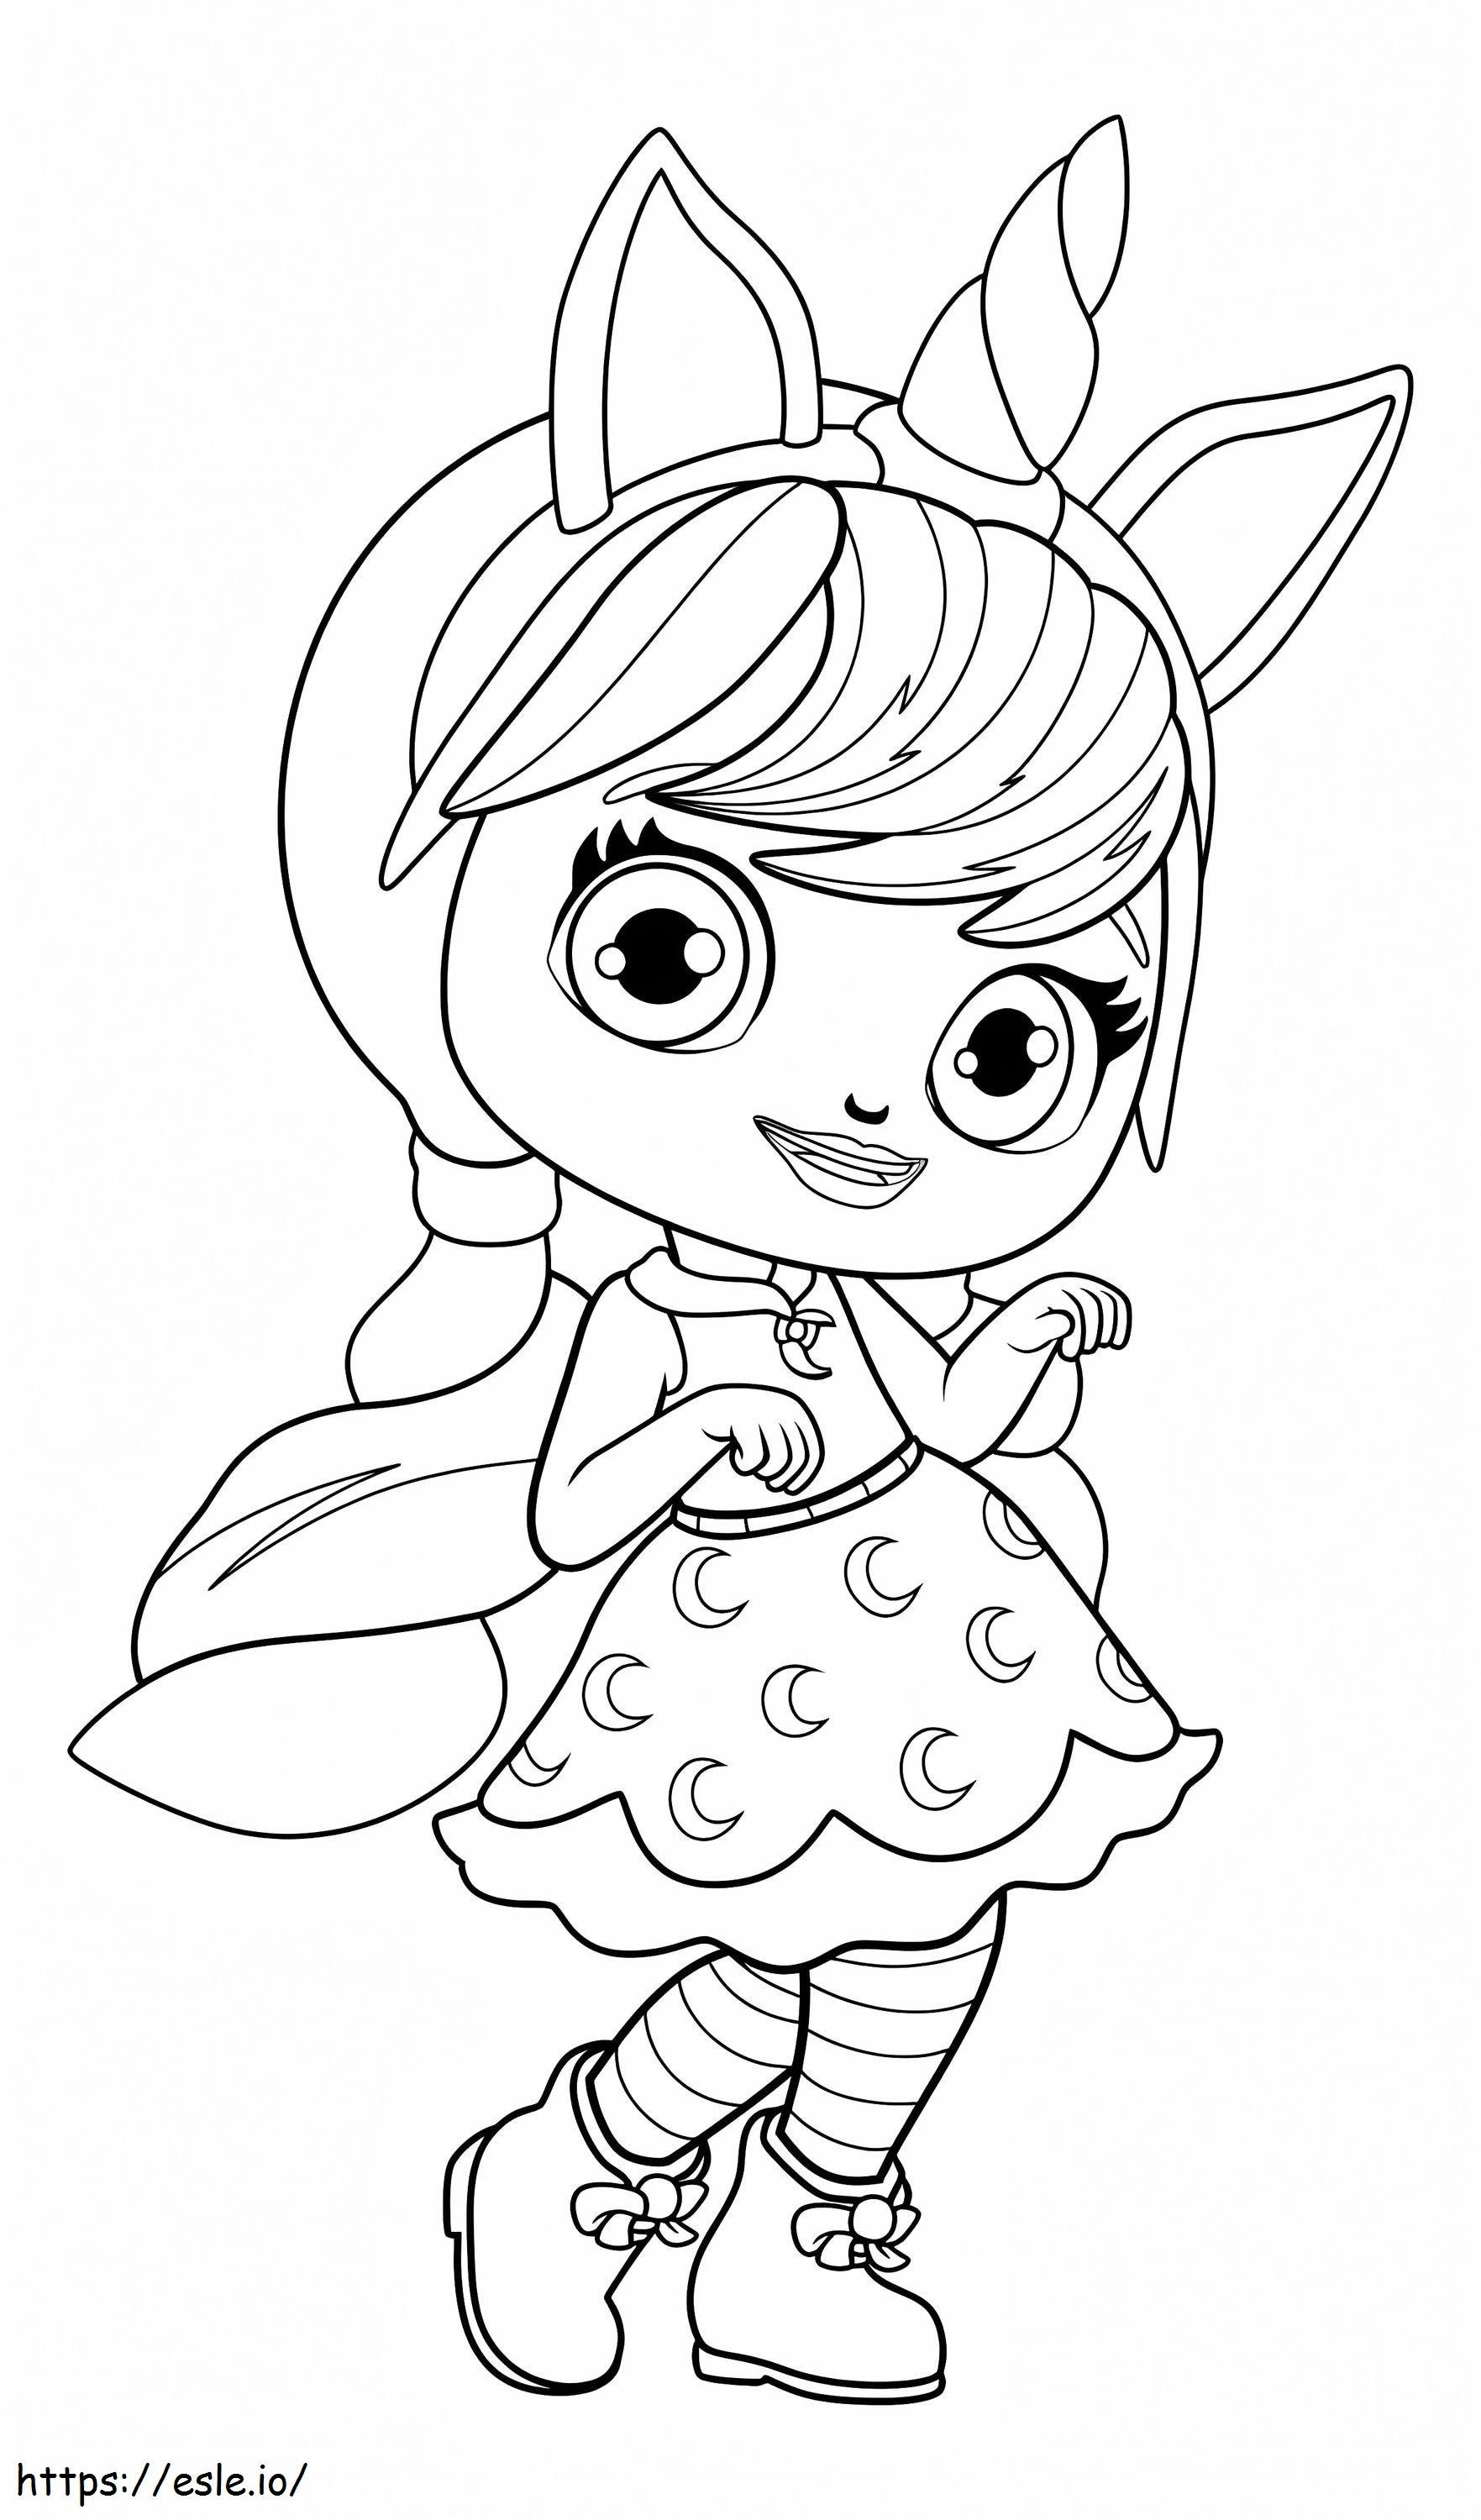 Lavender From Little Charmers coloring page